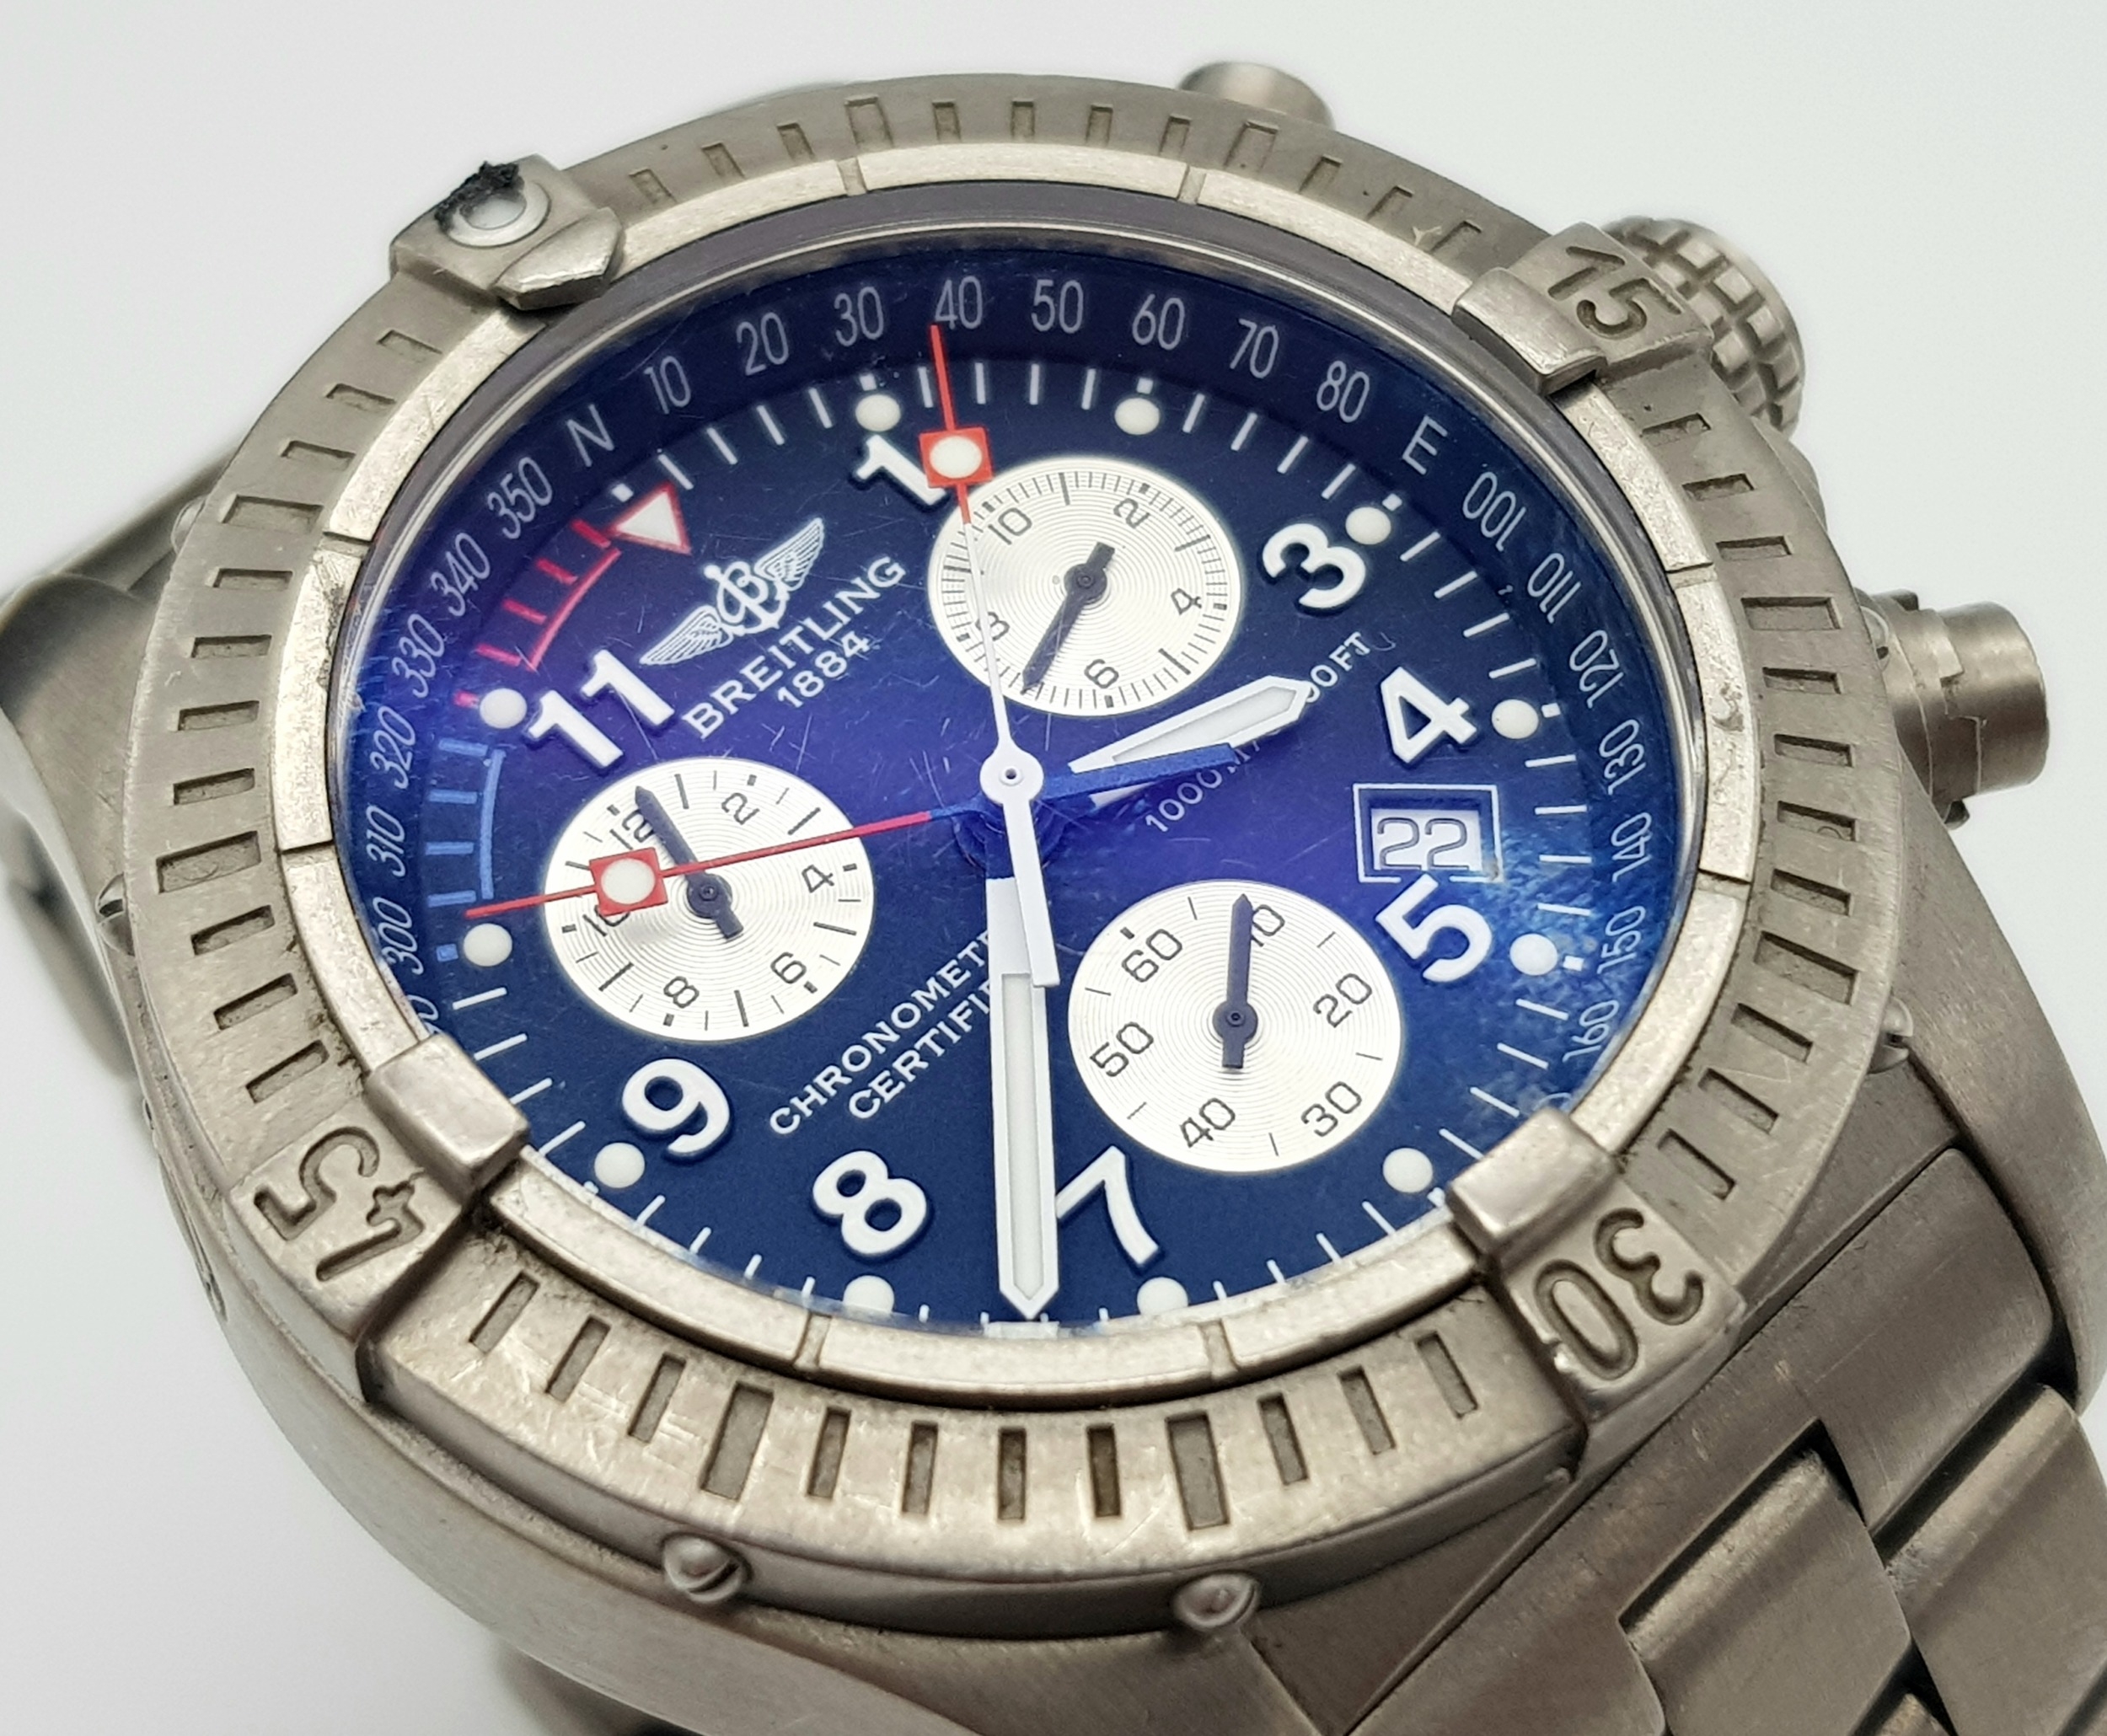 A BREITLING GTS CHRONOMETRE IN STAINLESS STEEL WITH BLUE FACE AND 3 SUBDIALS , AUTOMATIC - Image 4 of 10